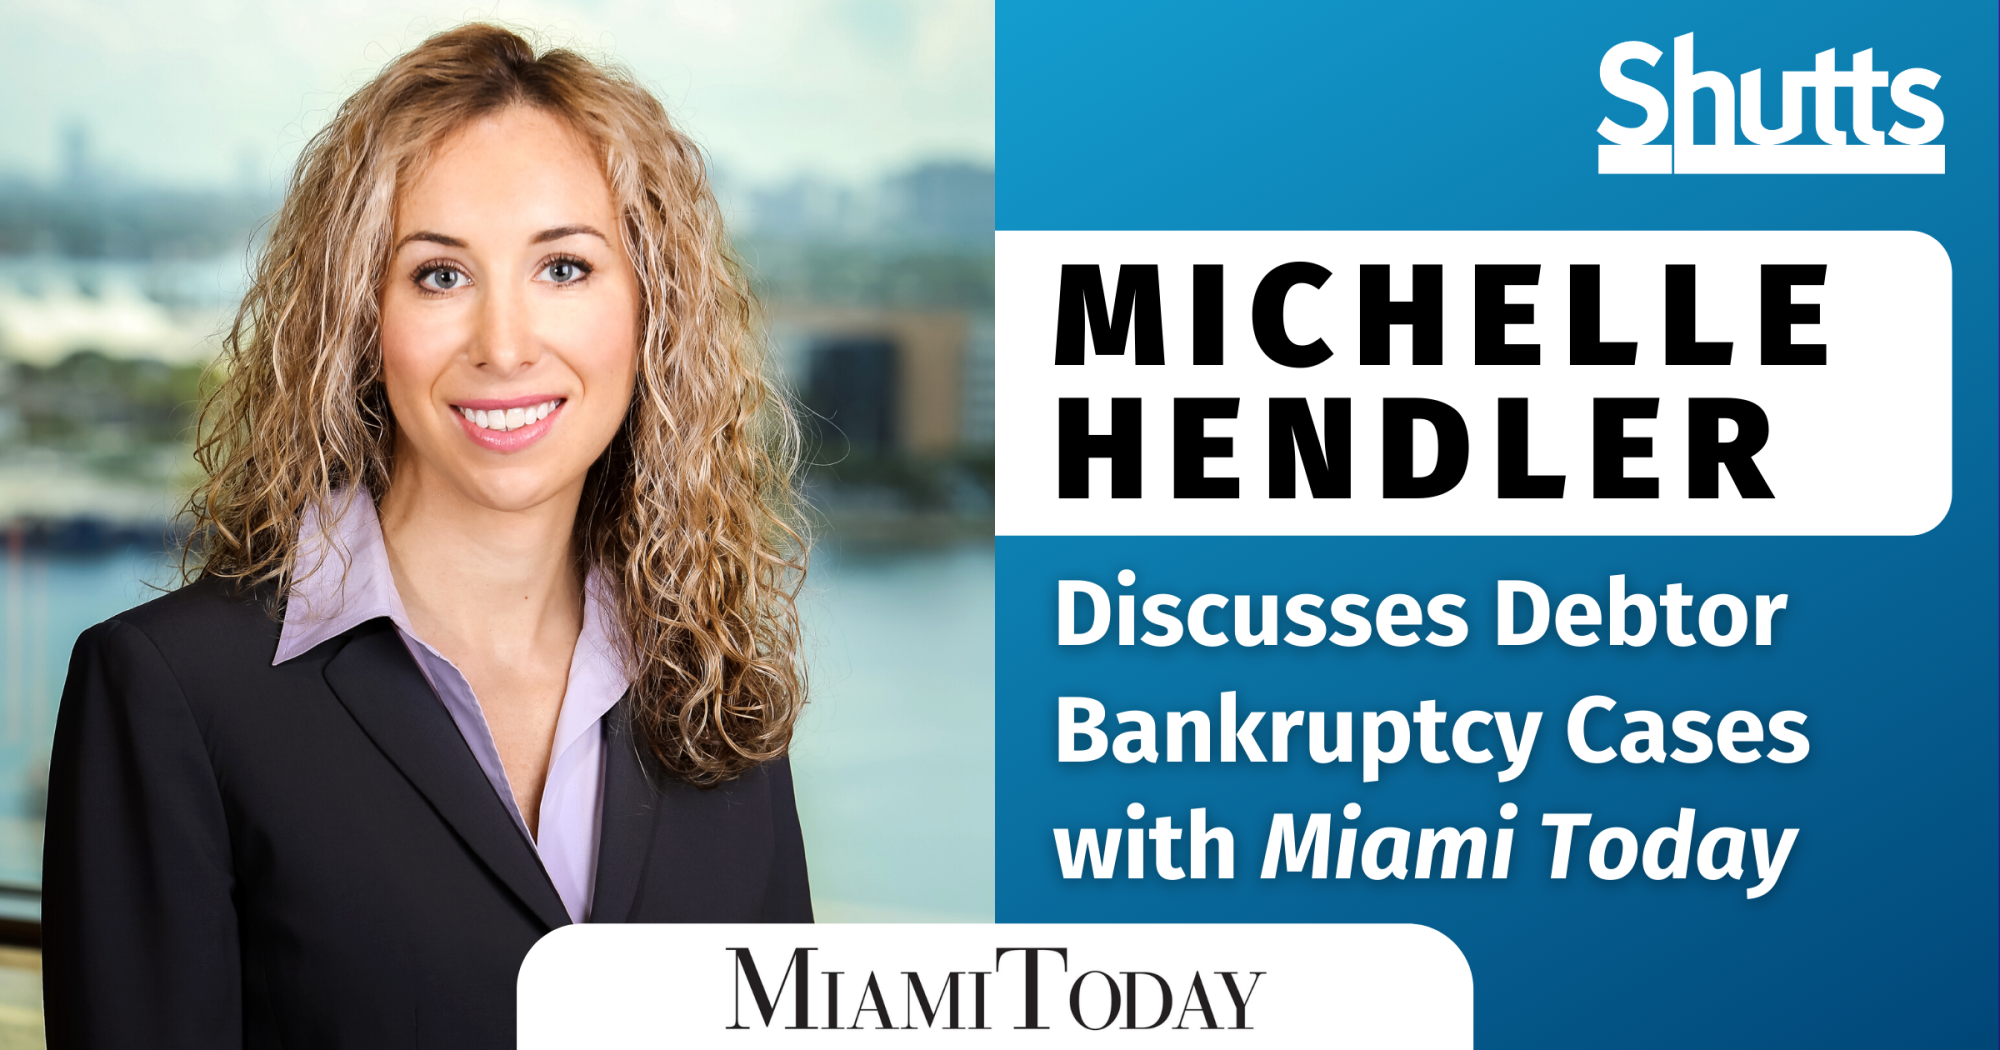 Michelle Hendler Discusses Debtor Bankruptcy Cases with Miami Today